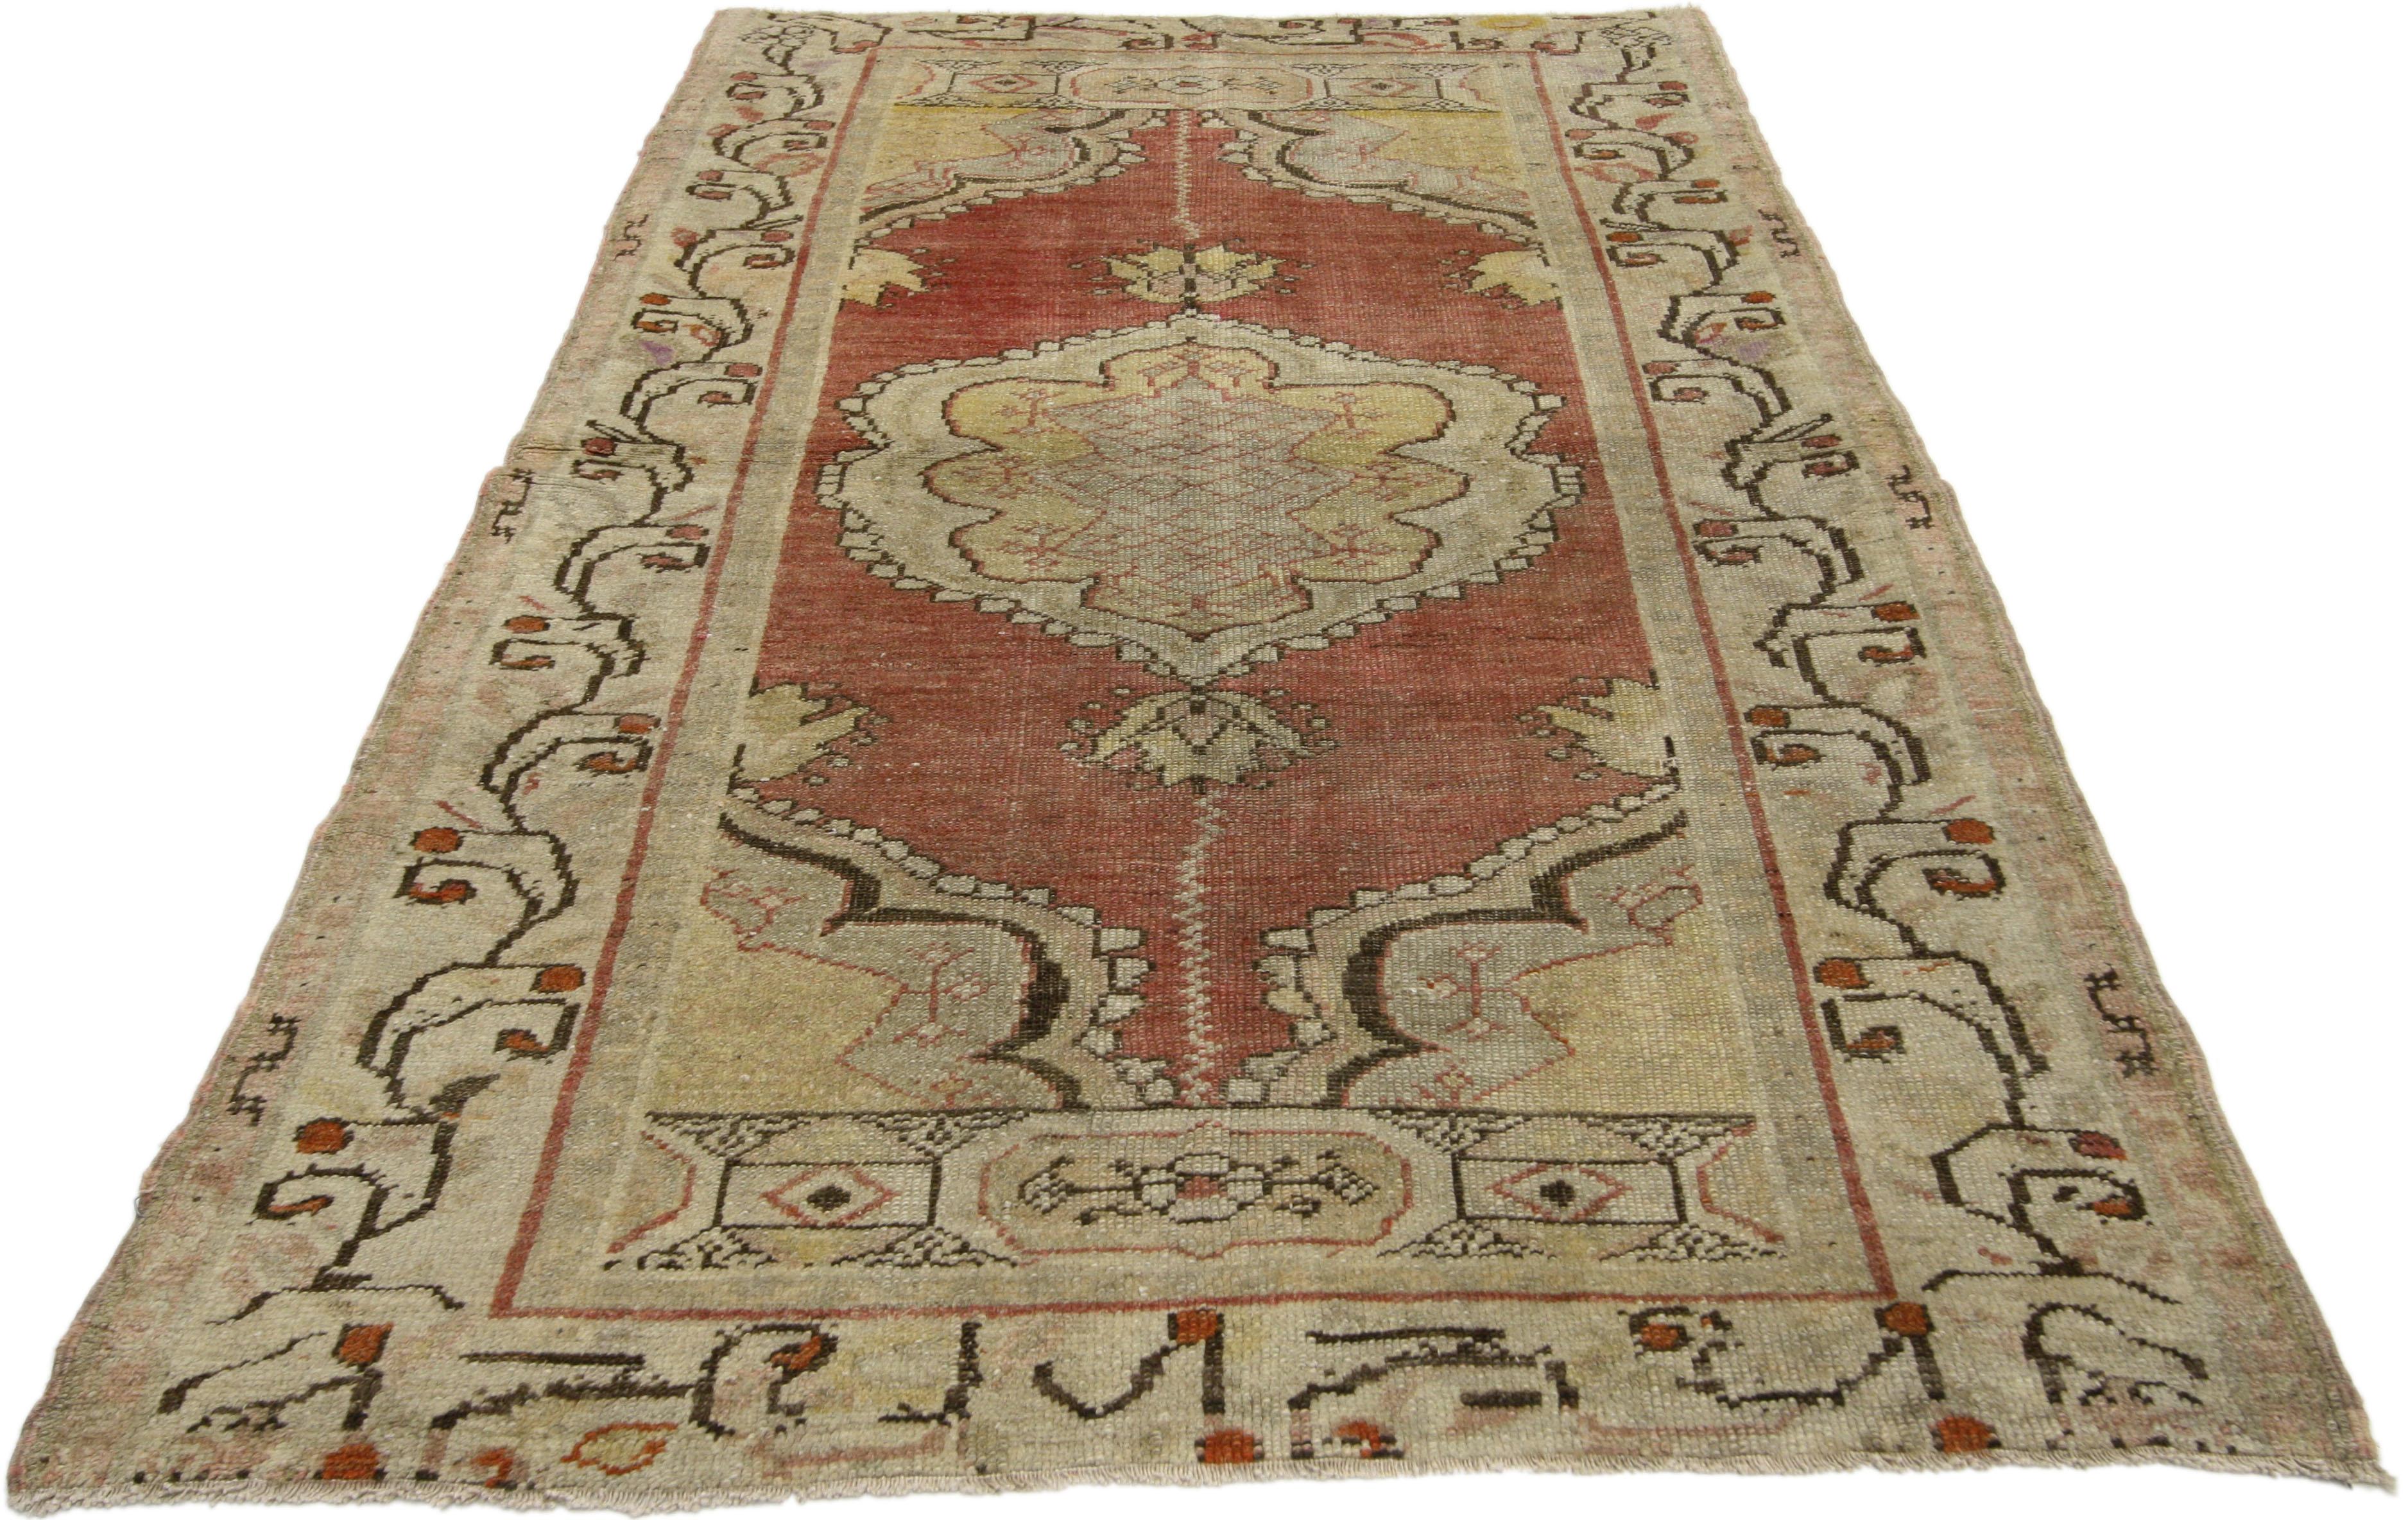 50305, vintage Turkish Oushak Accent rug, entry or foyer rug. This vintage Turkish Oushak rug features a modern traditional style. Immersed in Anatolian history and refined colors, this vintage Oushak rug combines simplicity with sophistication.